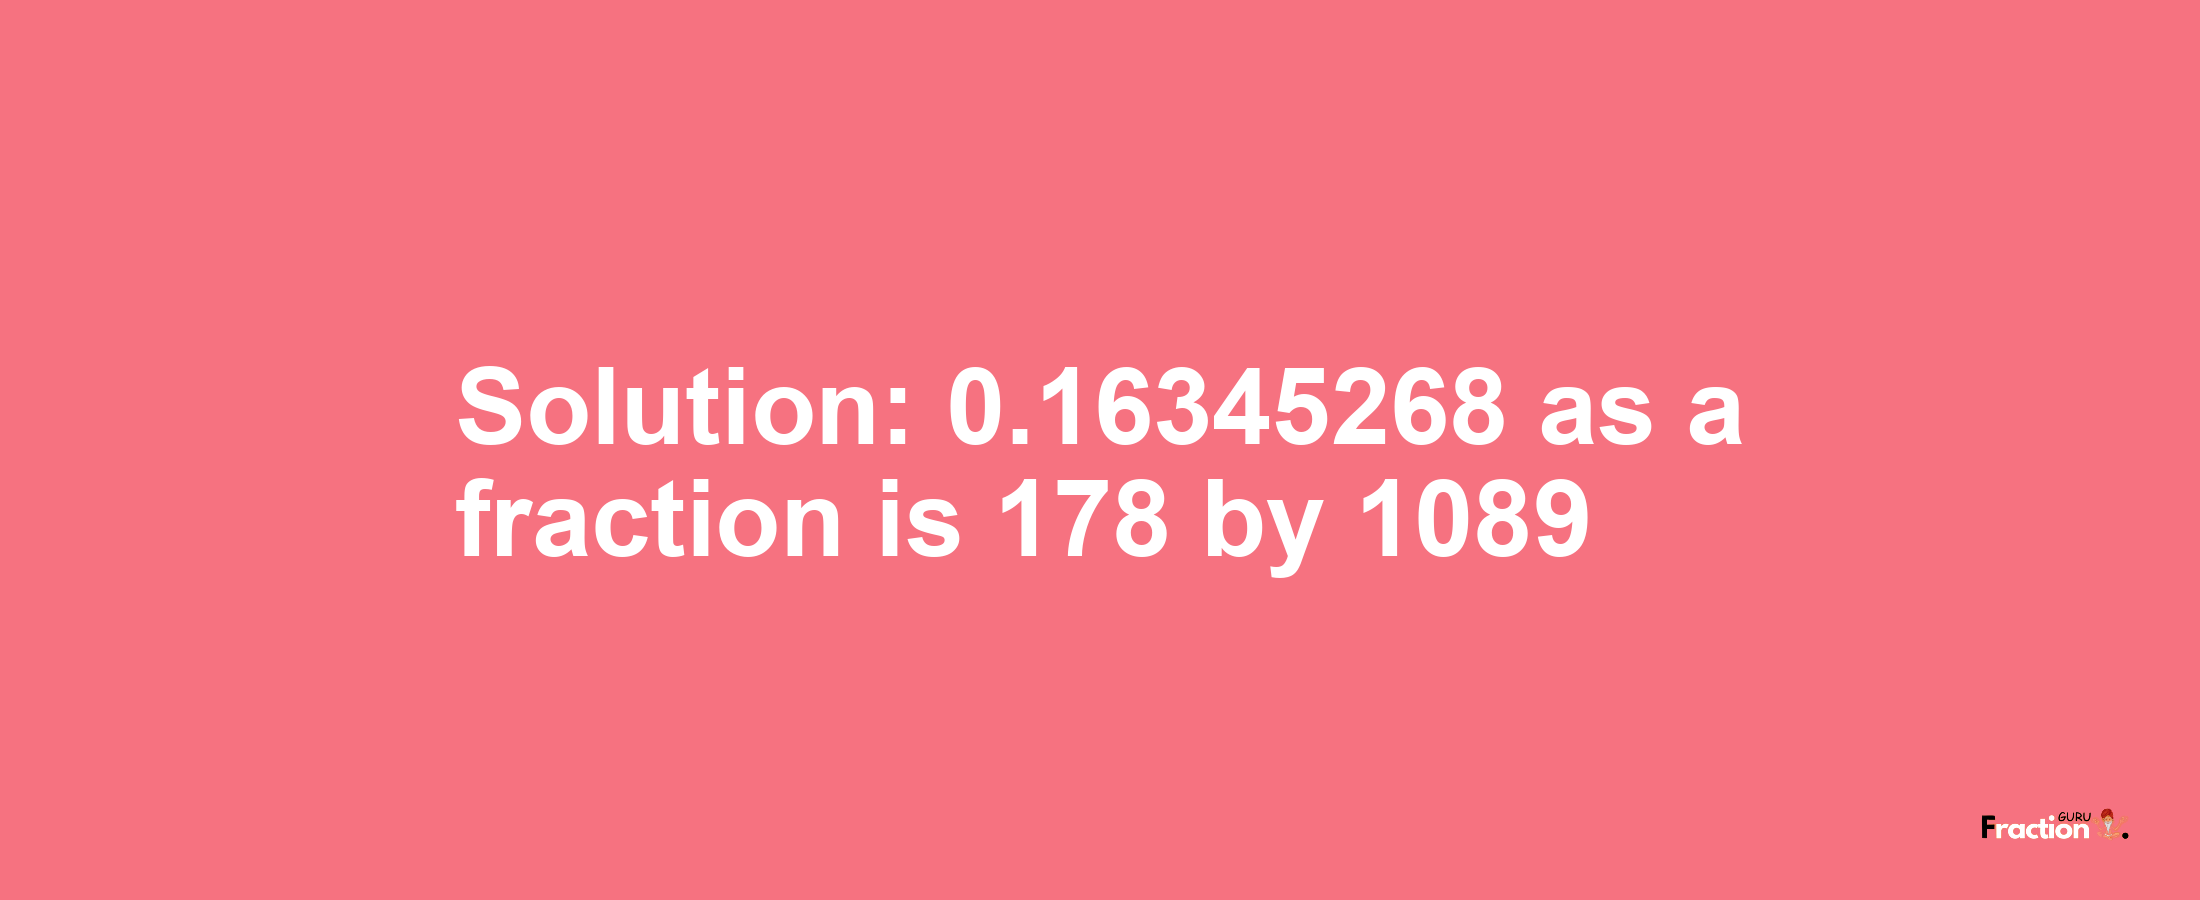 Solution:0.16345268 as a fraction is 178/1089